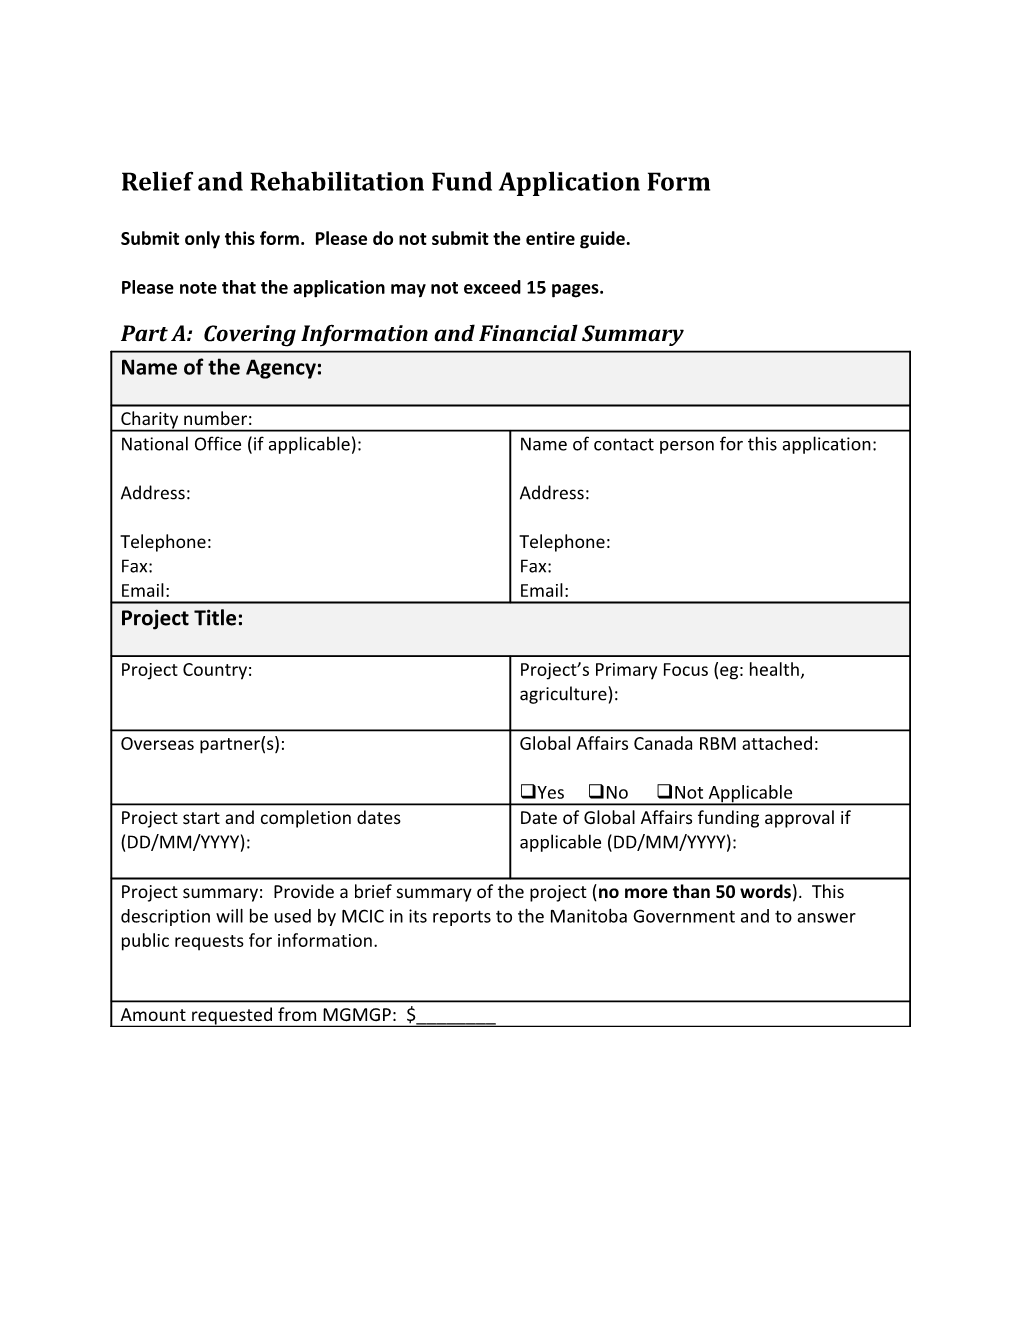 Relief and Rehabilitation Fund Application Form